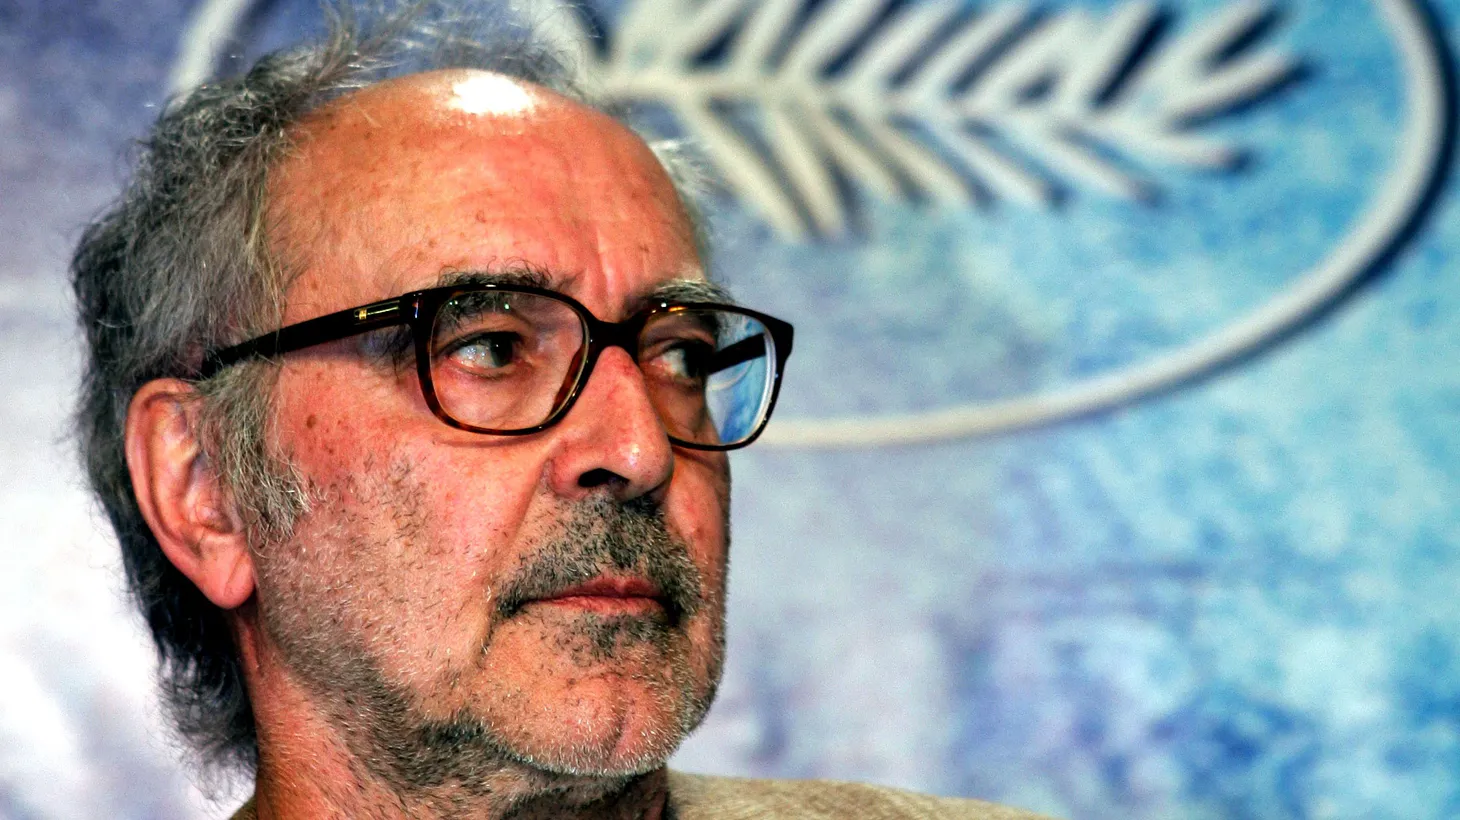 Swiss director Jean-Luc Godard listens to questions during a press conference for his film entry “Notre musique” at the 57th Cannes Film Festival, May 18, 2004.